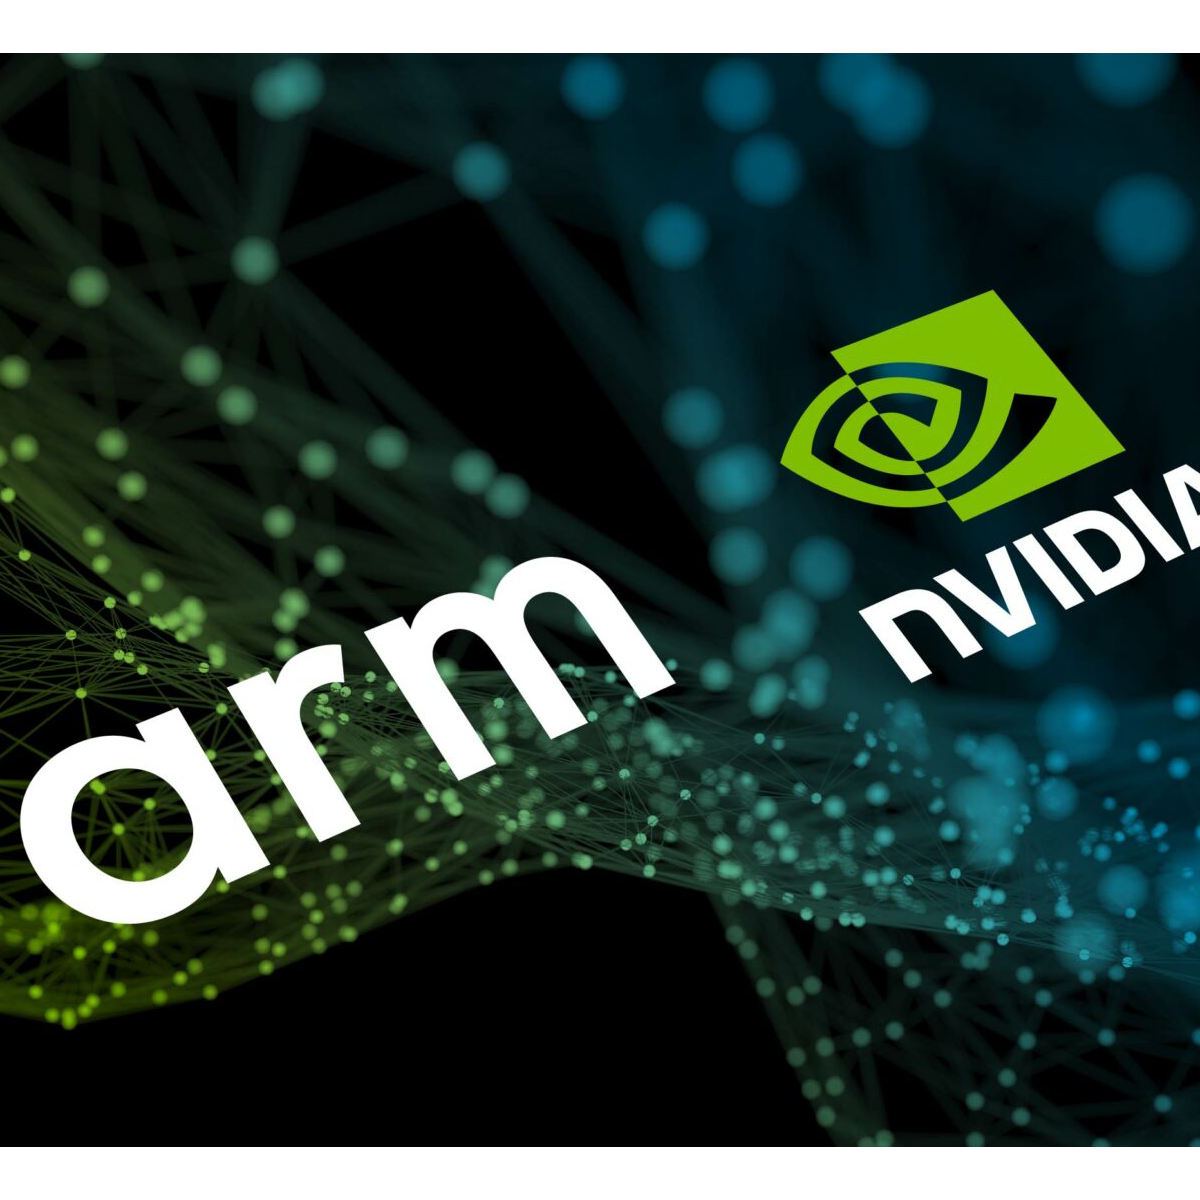 Nvidia and ARM's Deal